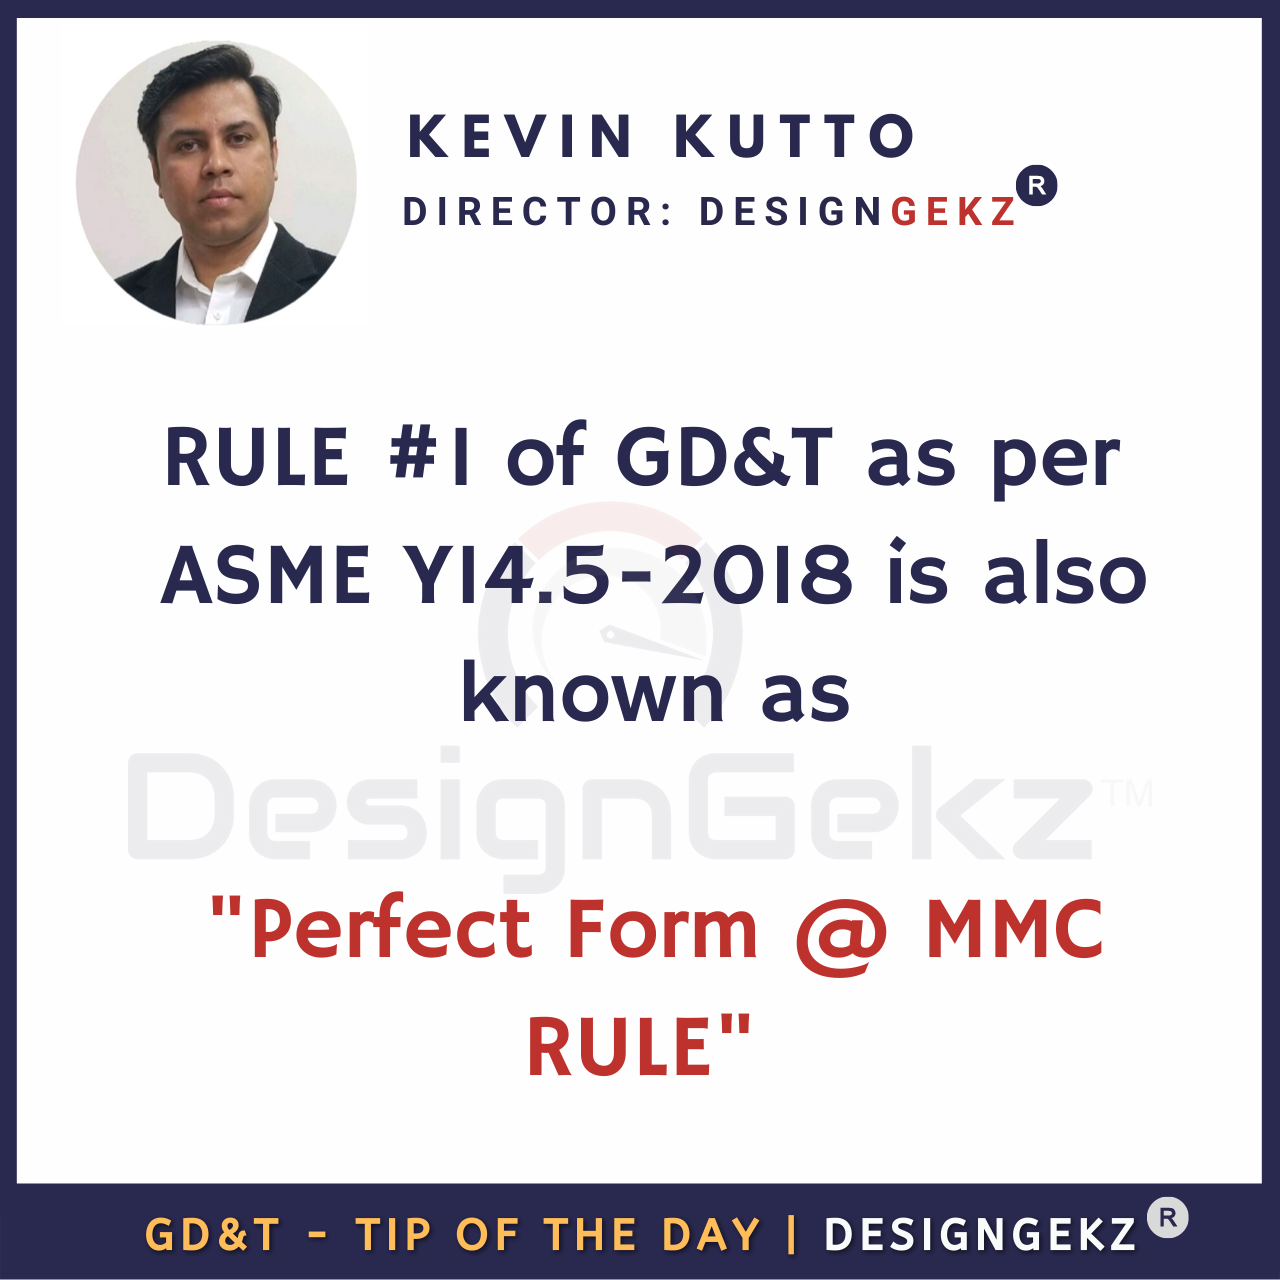 Rule 1 of GD&T | Kevin Kutto | Designgekz